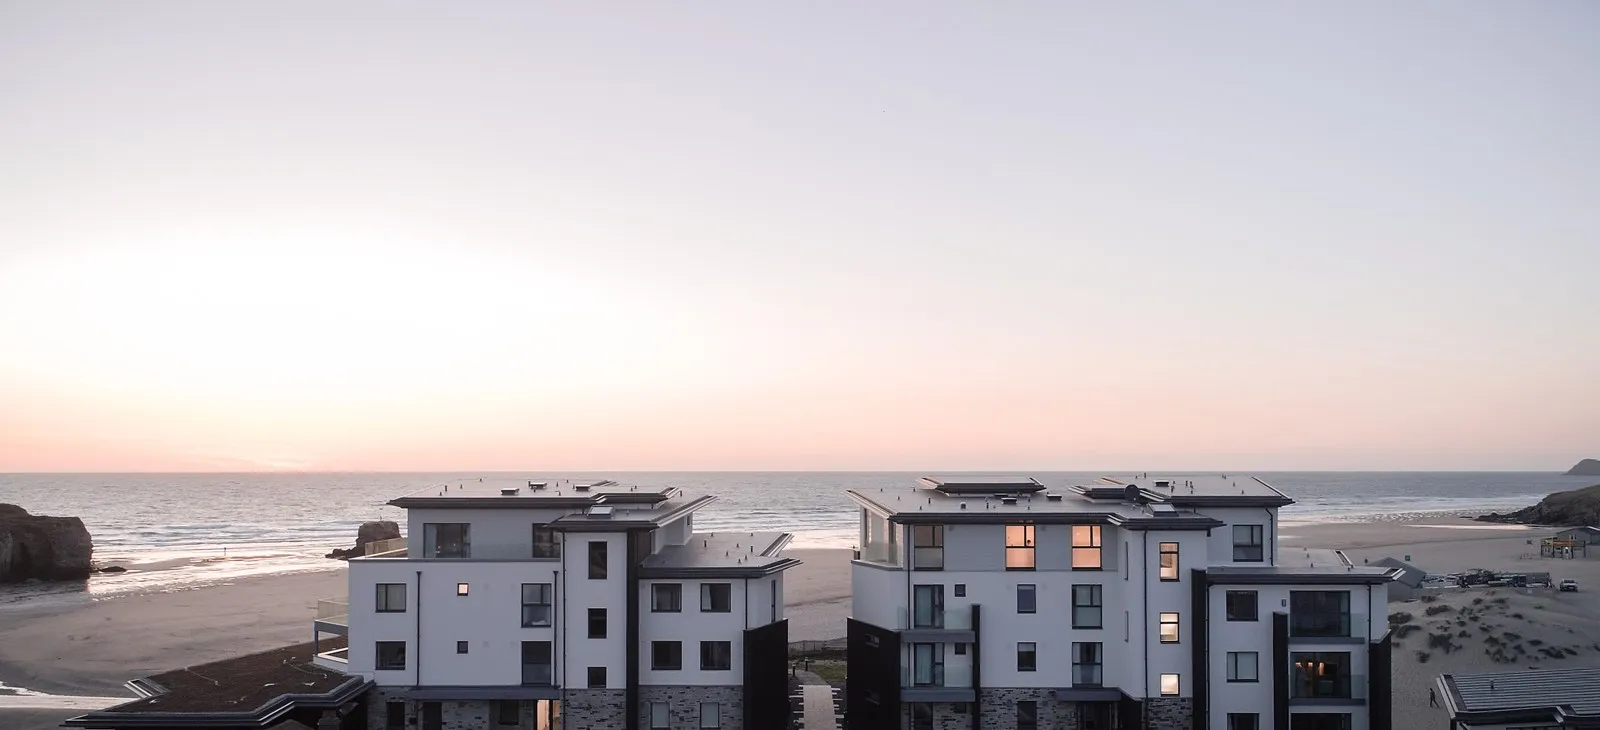 Modern apartment buildings overlooking the sea.